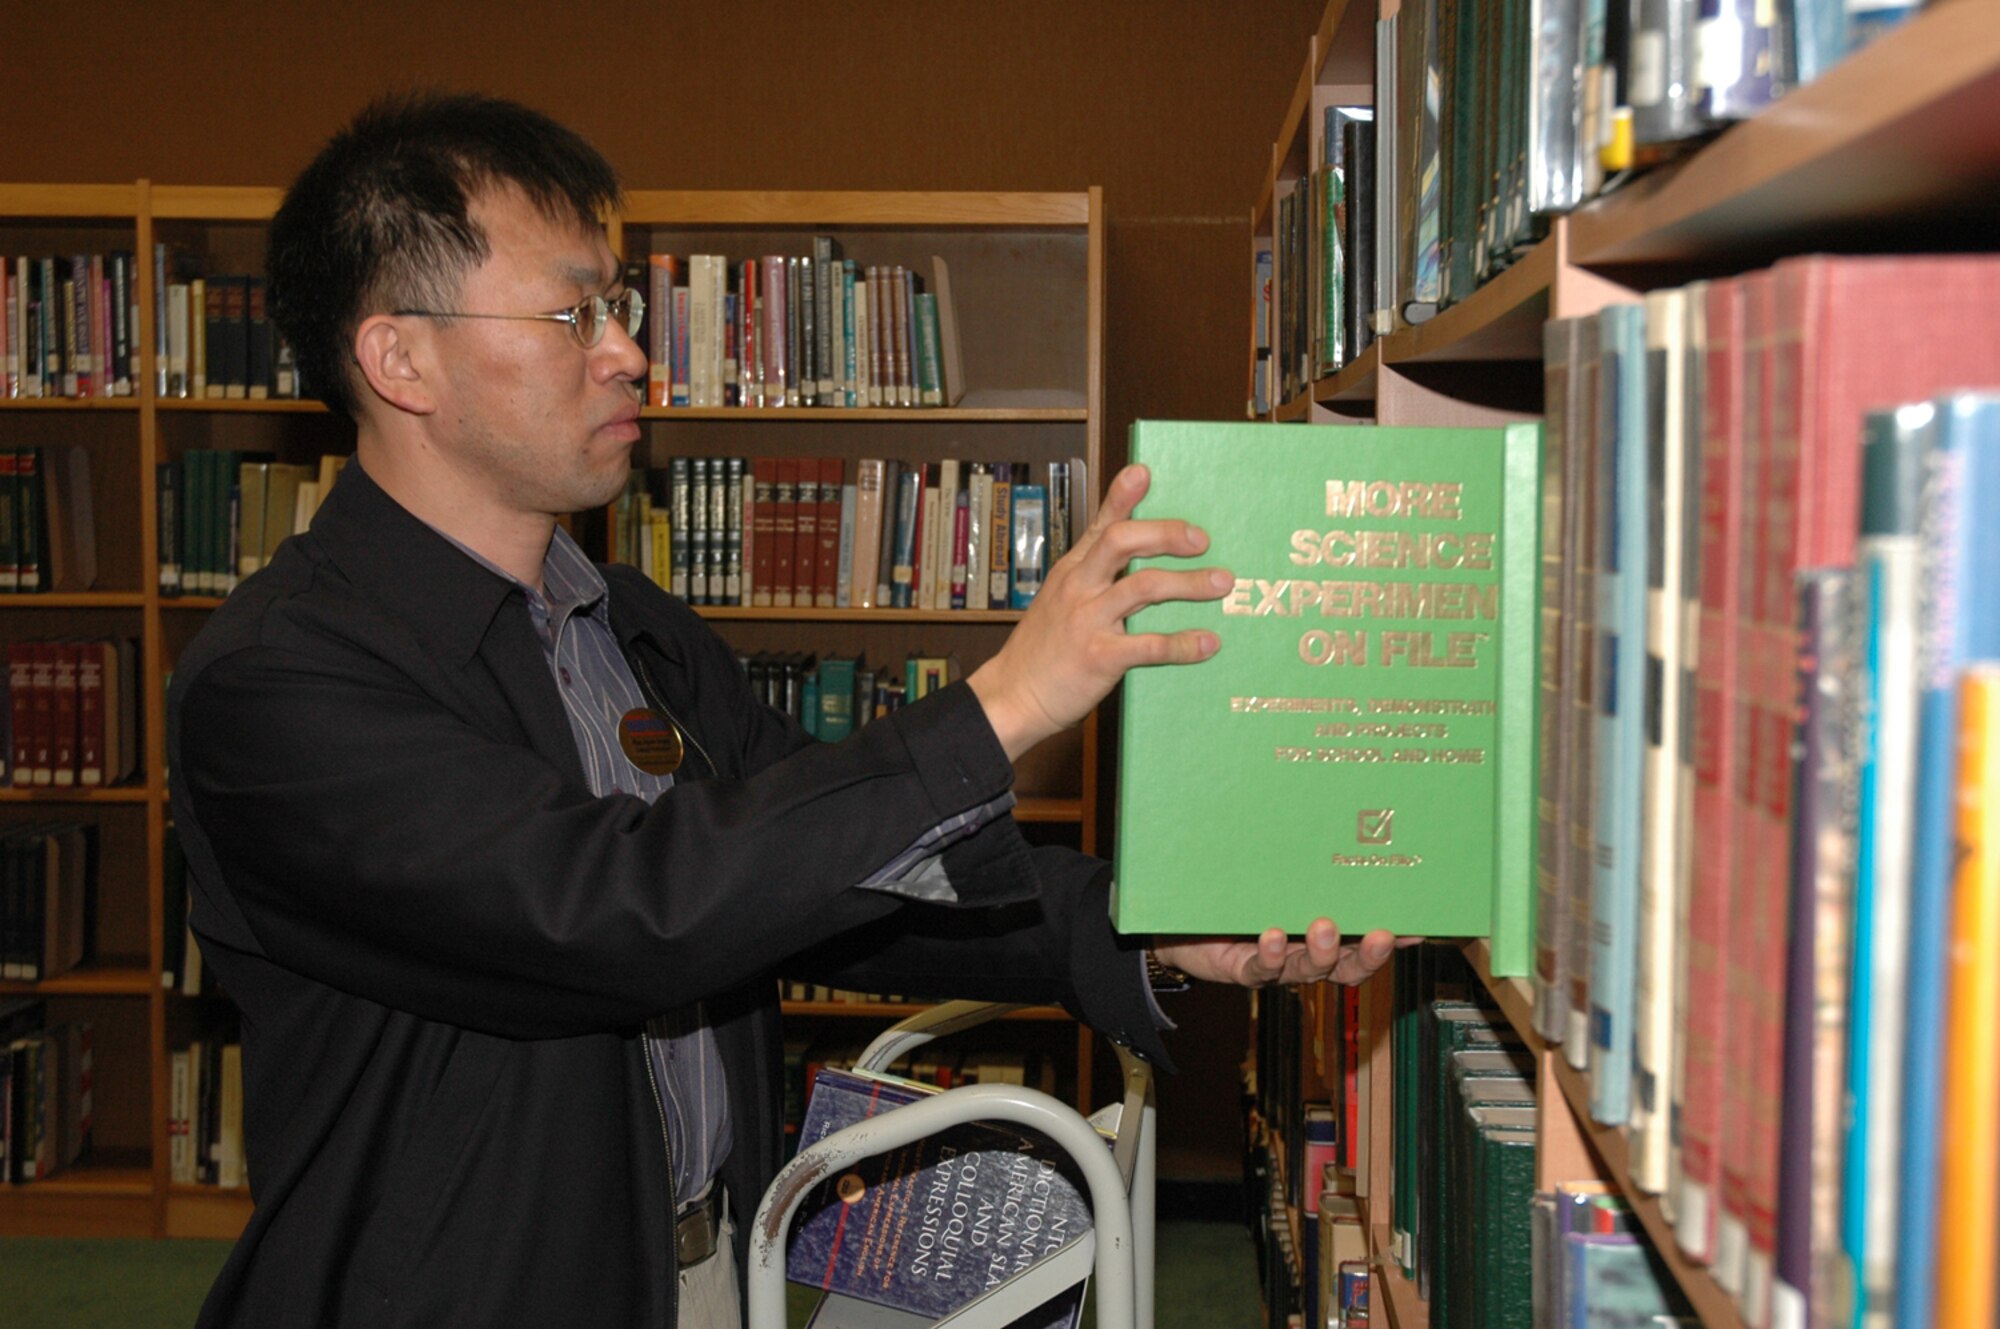 OSAN AIR BASE, Republic of Korea --  Mr. Pae, Hyon chong, reshelves books at the Osan Base Library before they open Thursday. The library has six employees and three volunteers that do everything from putting the books in order to ciculating old books. (U.S. Air Force photo by Staff Sgt. Benjamin Rojek)